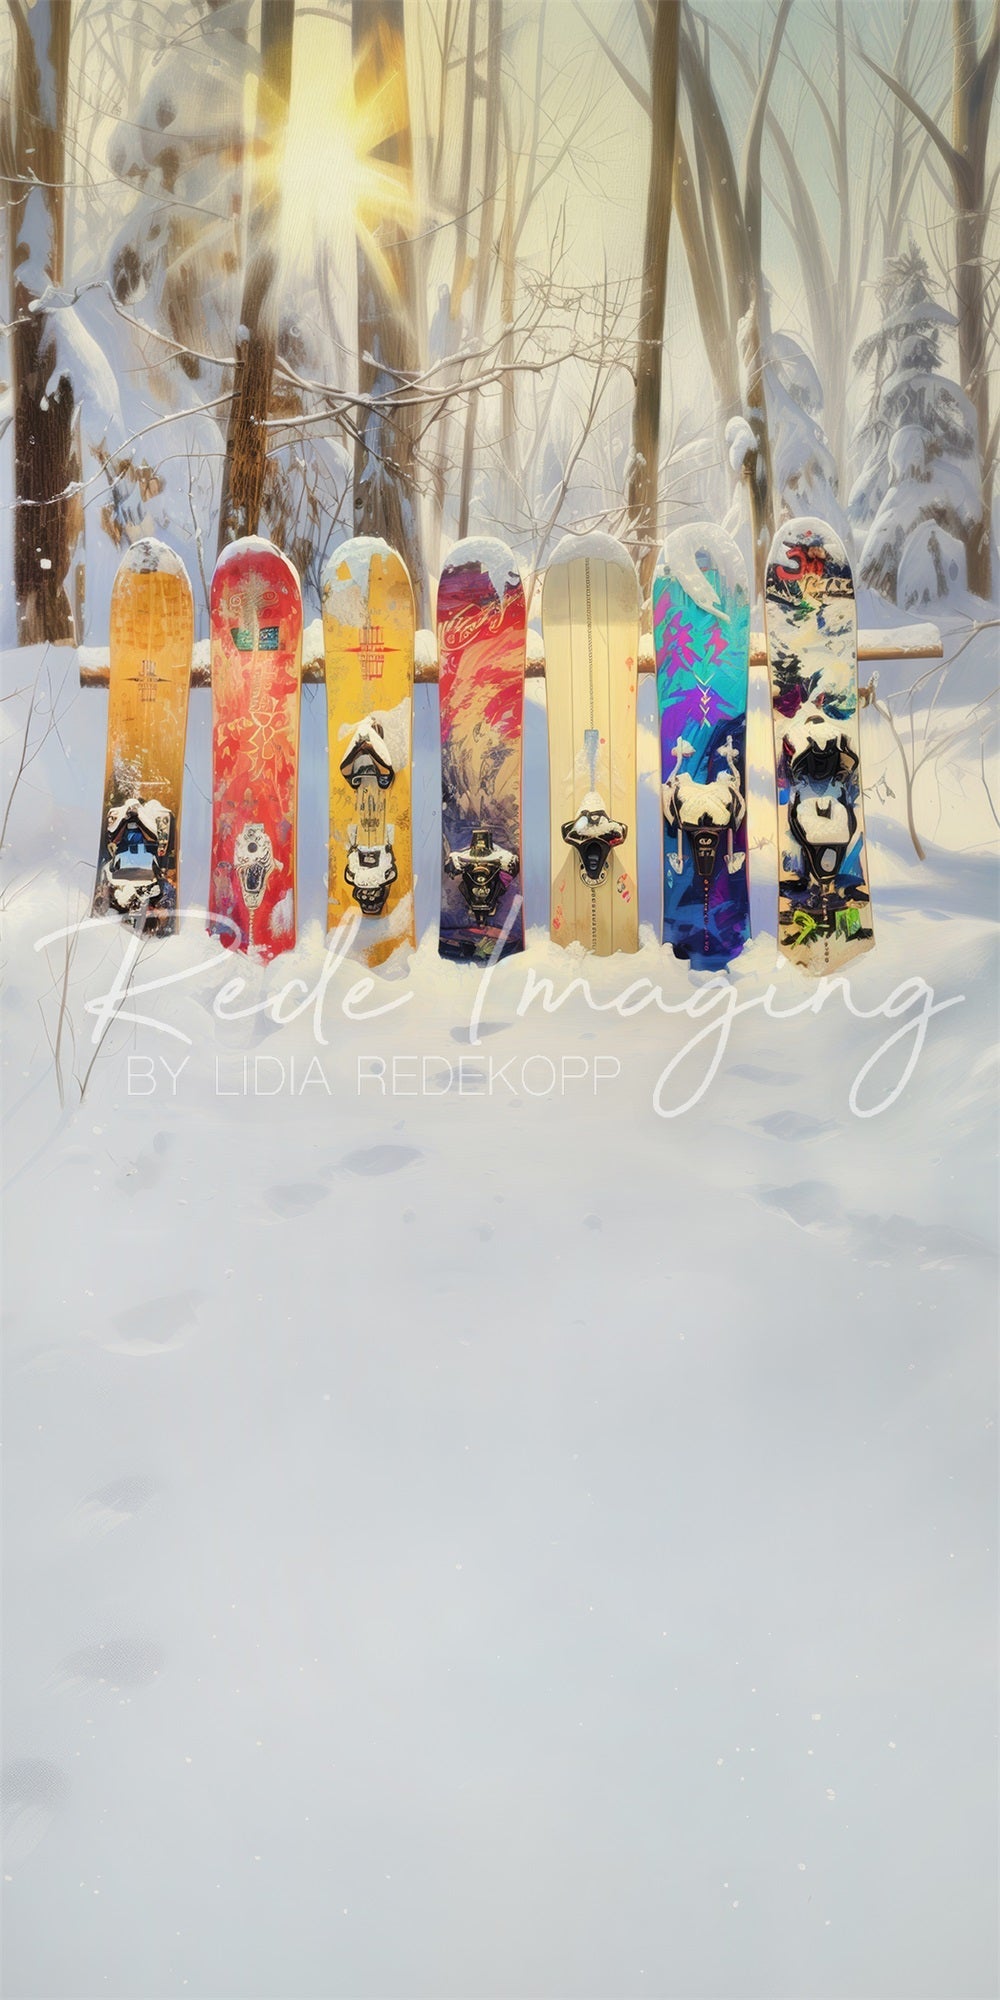 Kate Sweep Winter Forest Colorful Graffiti Snowboard Backdrop Designed by Lidia Redekopp